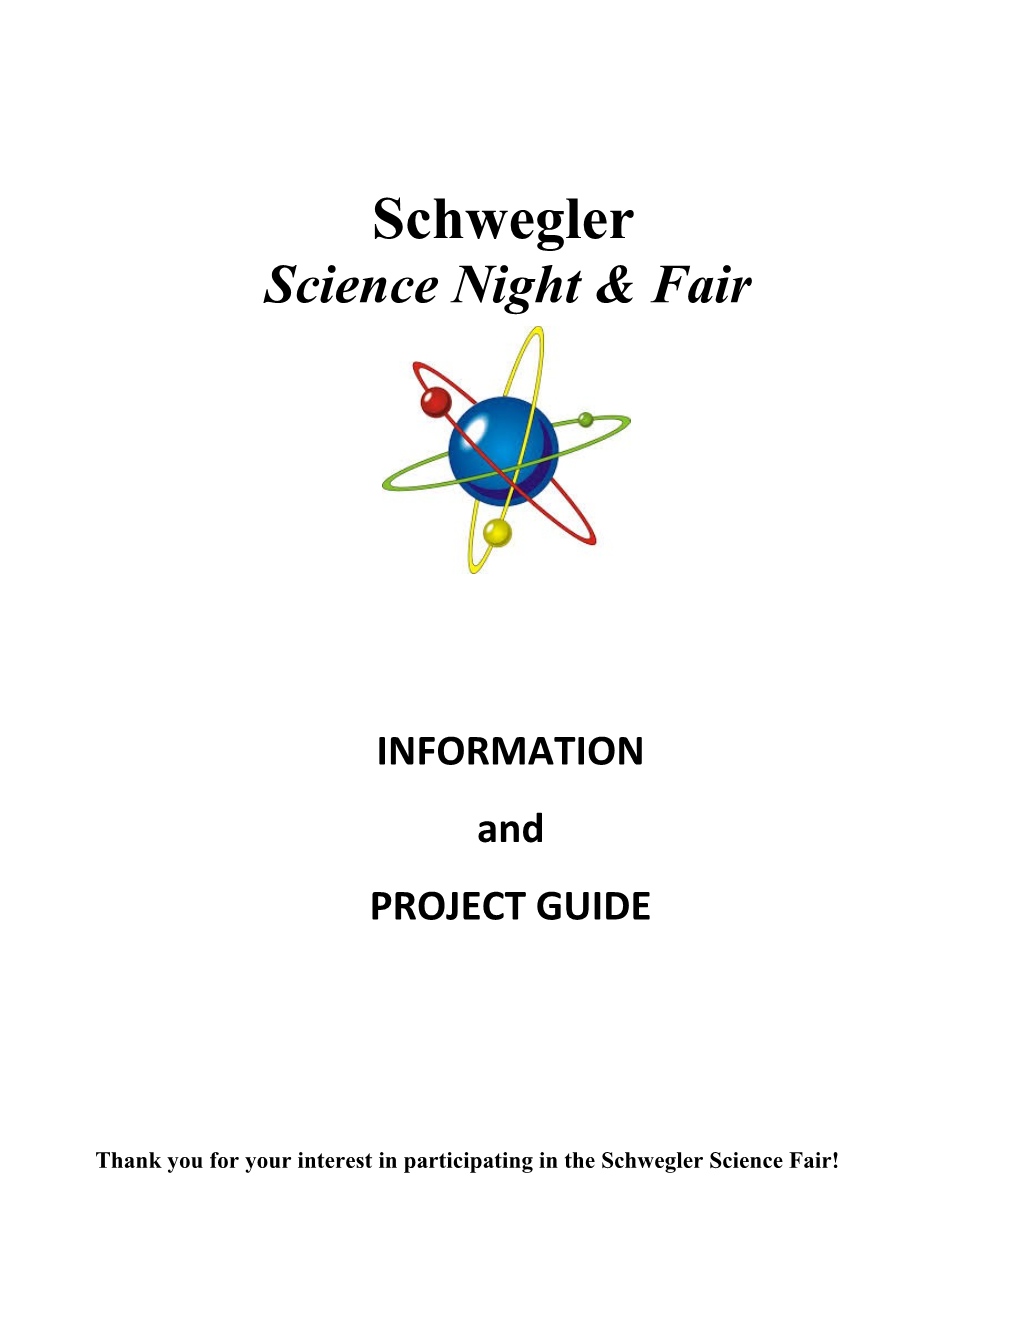 Thank You for Your Interest in Participating in the Schwegler Science Fair!